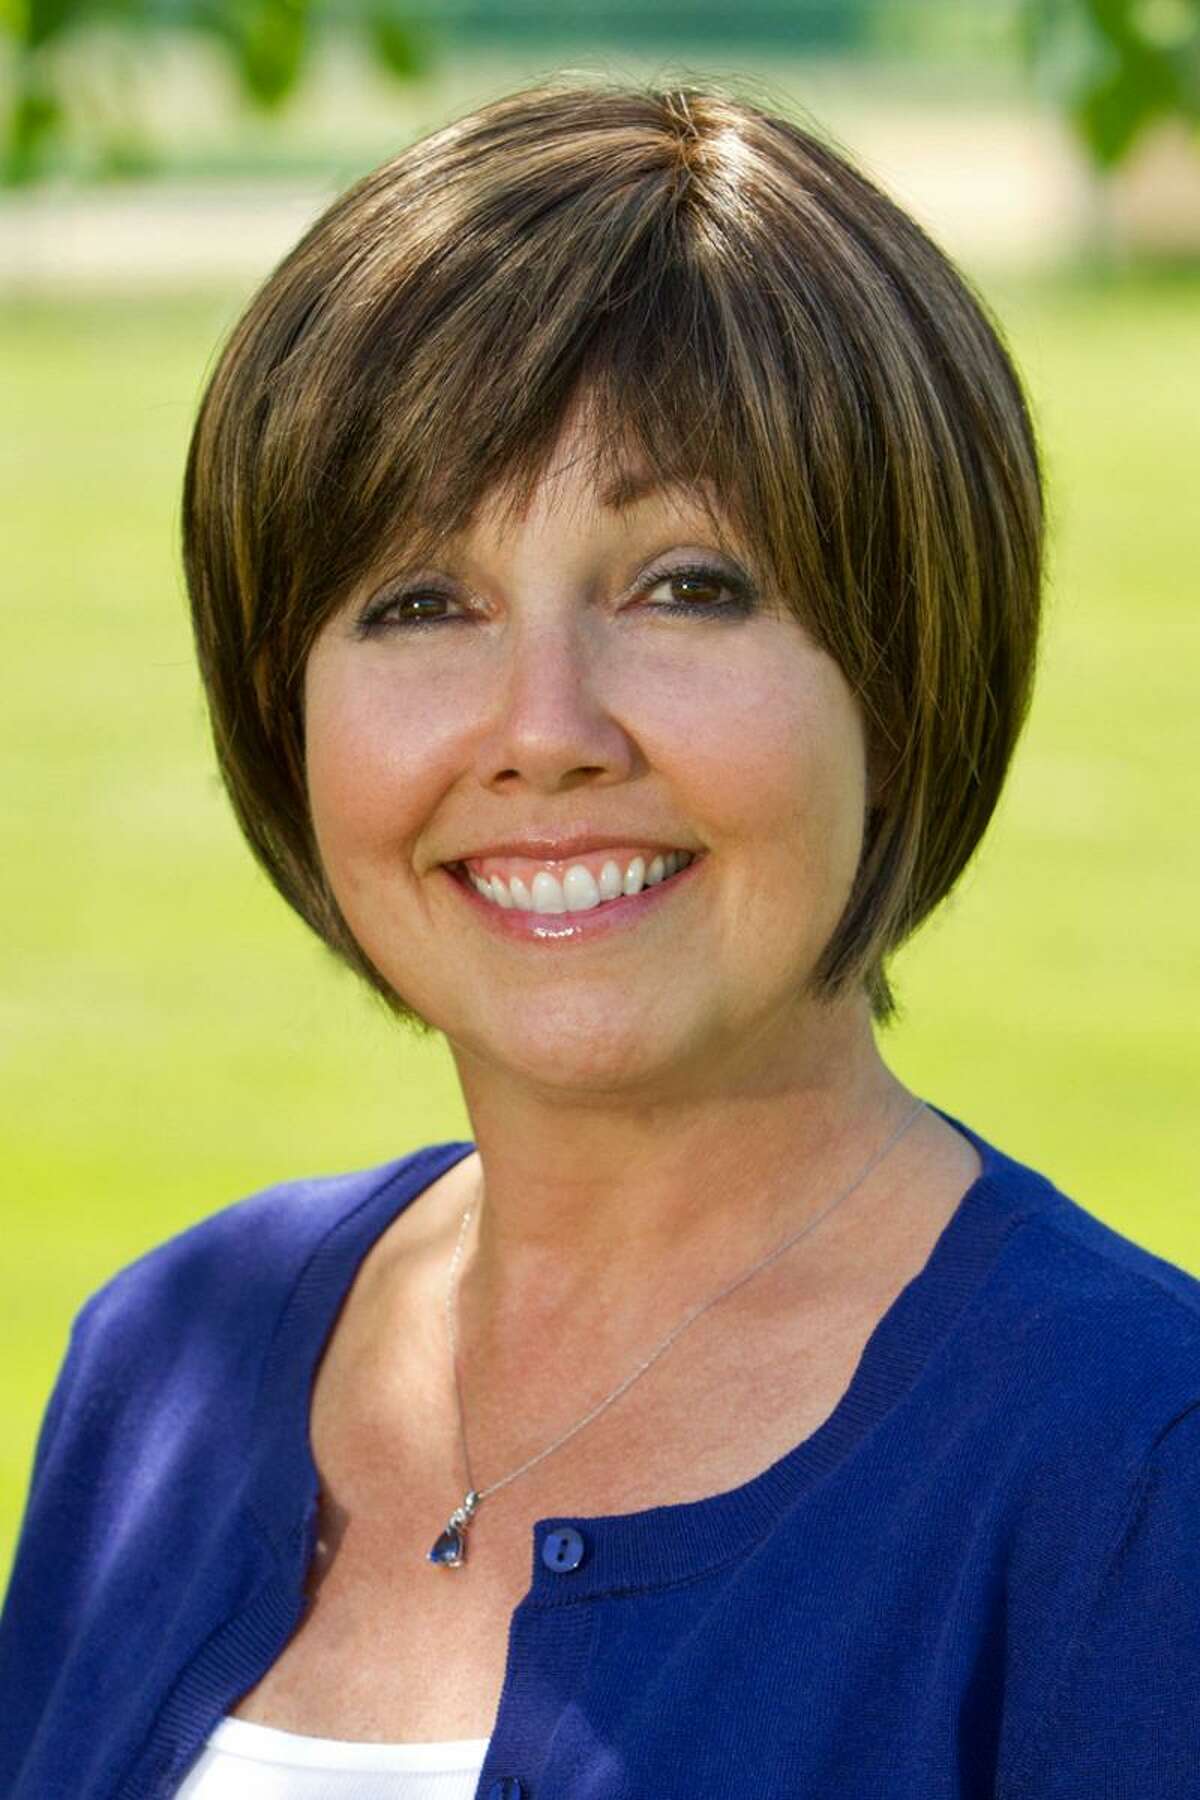 State Rep. Pam Staneski of Milford, is seeking the Republican nomination for the 14th State Senate seat.